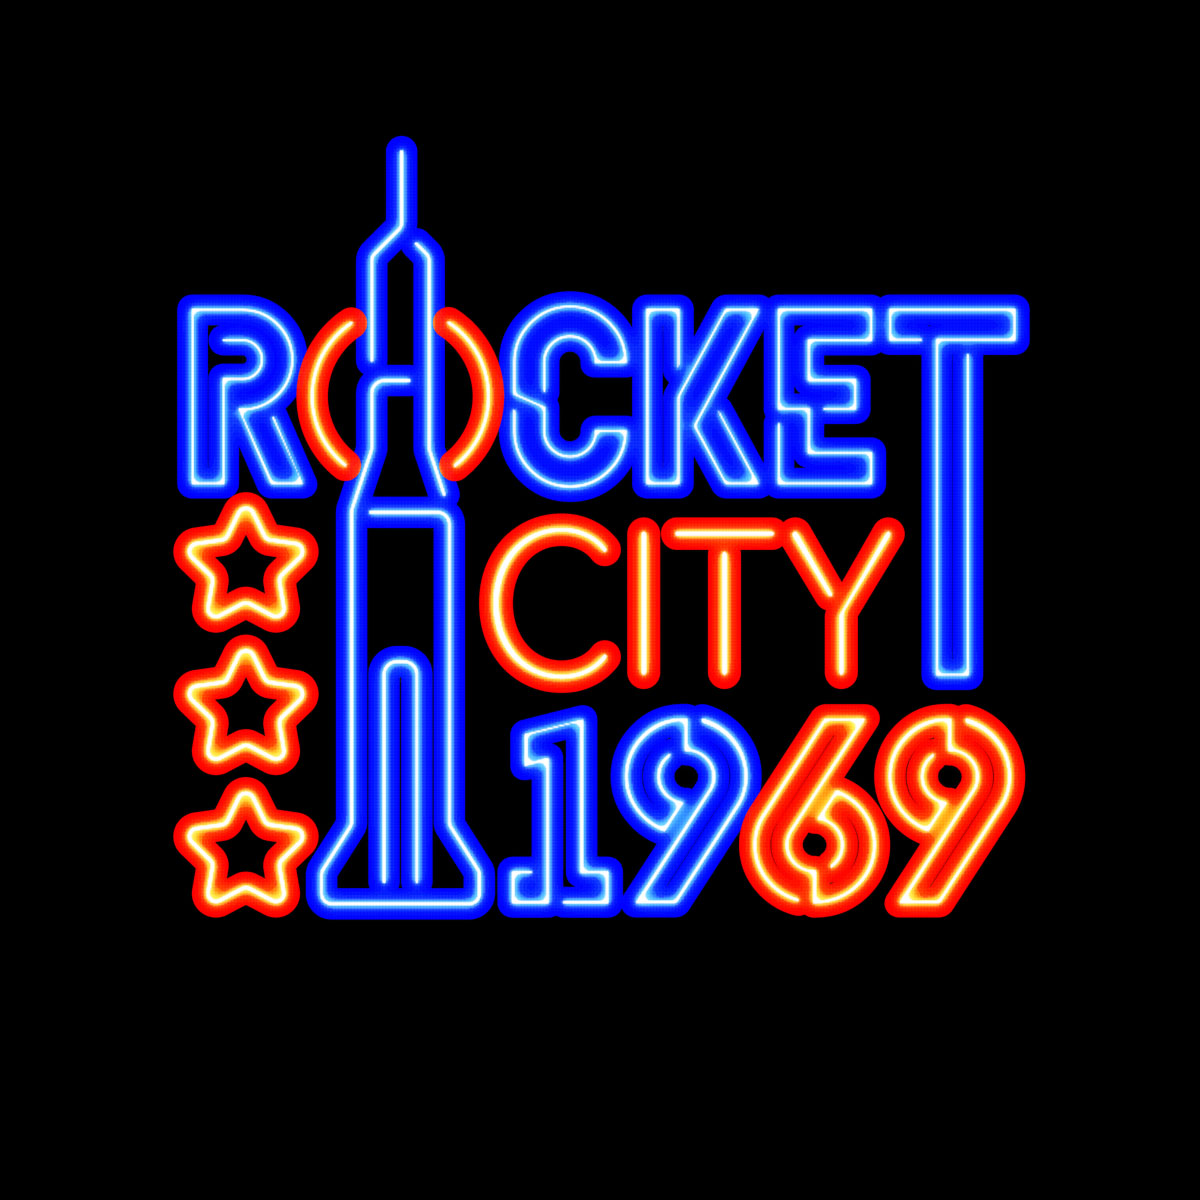 Thumbnail of neon lights design with text "Rocket City 1969" on black background